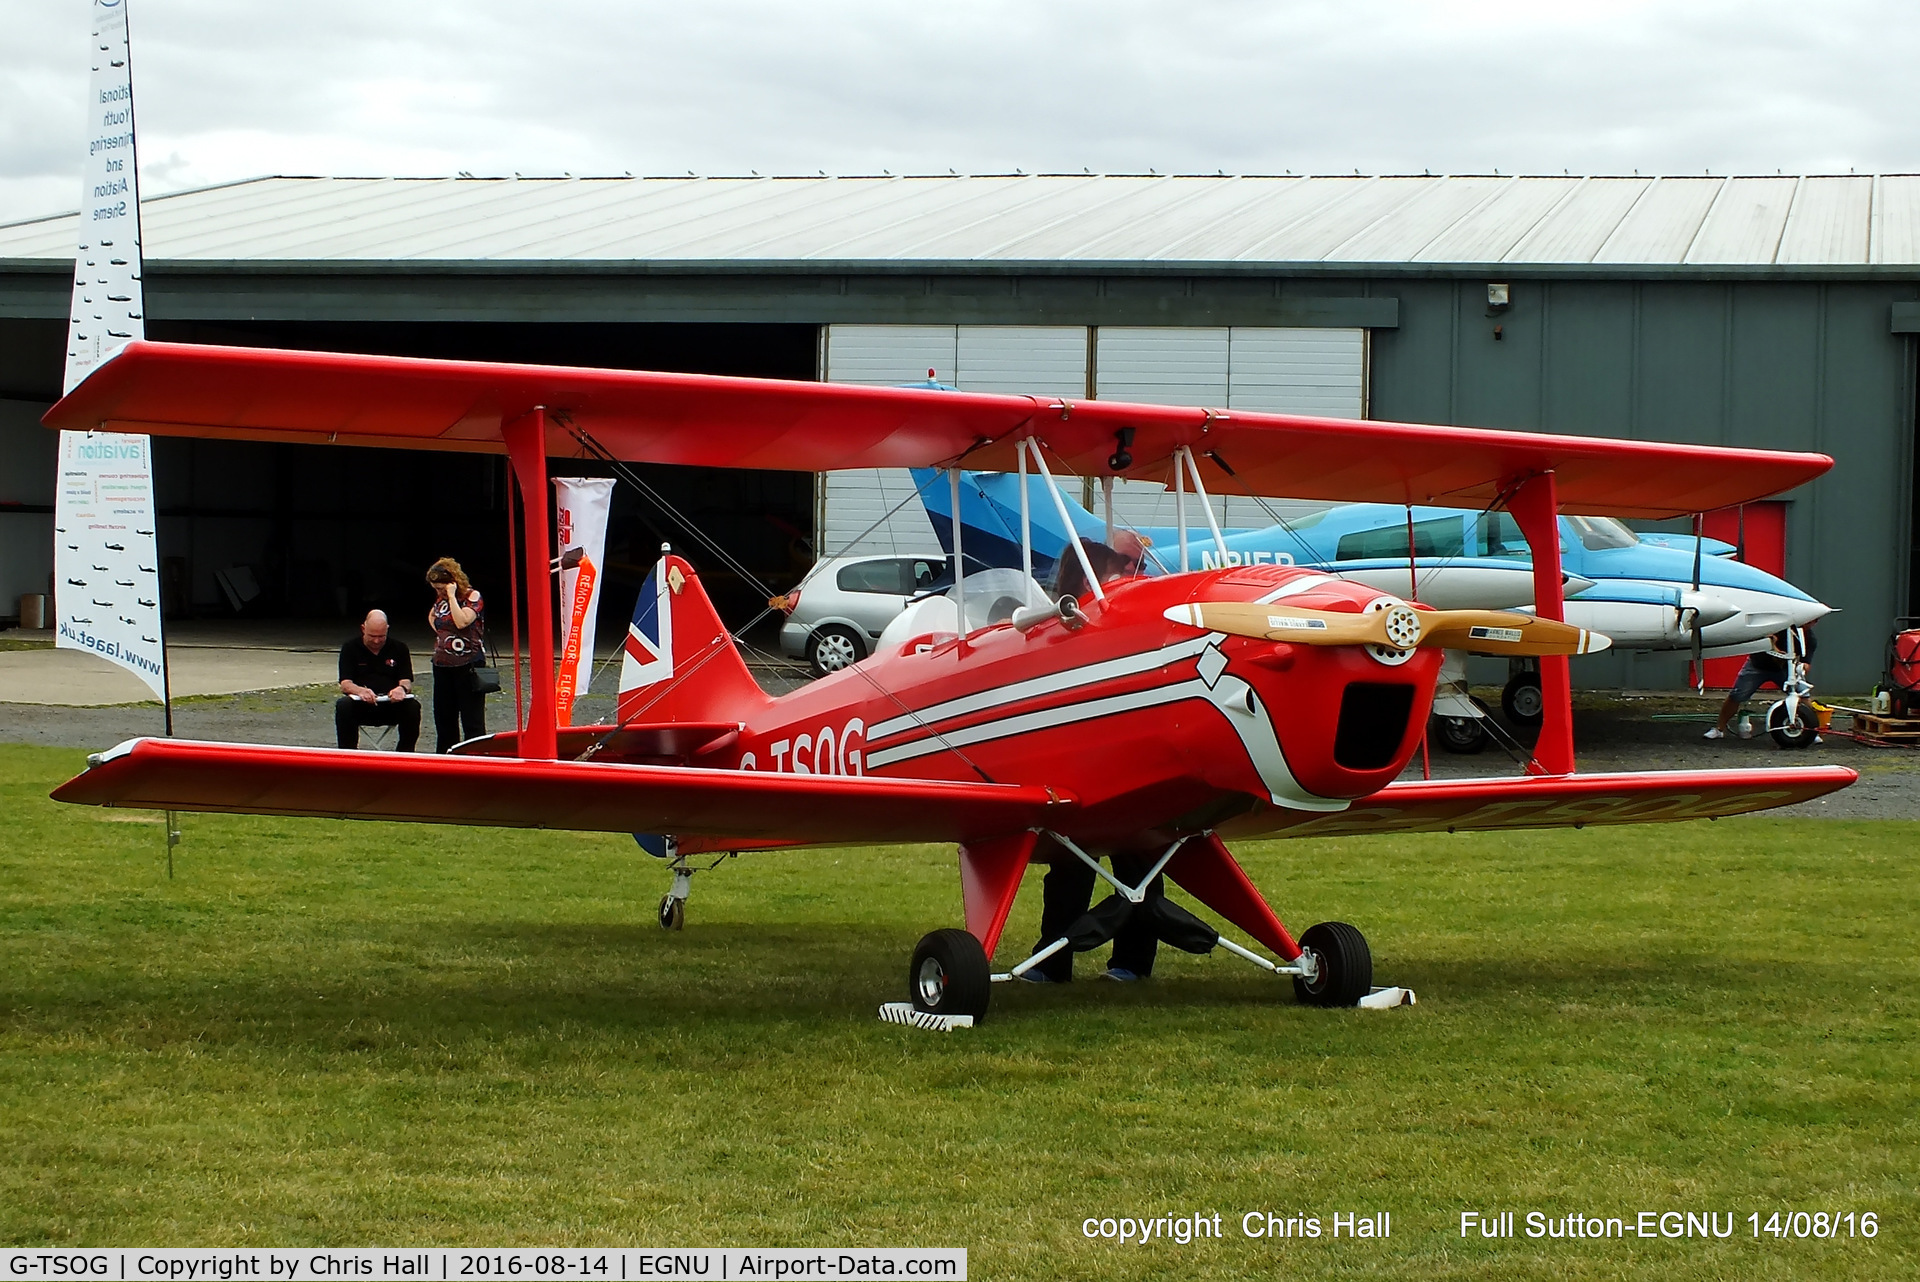 G-TSOG, 2014 TLAC Sherwood Ranger ST C/N LAA 237A-15239, at the LAA Vale of York Strut fly-in, Full Sutton